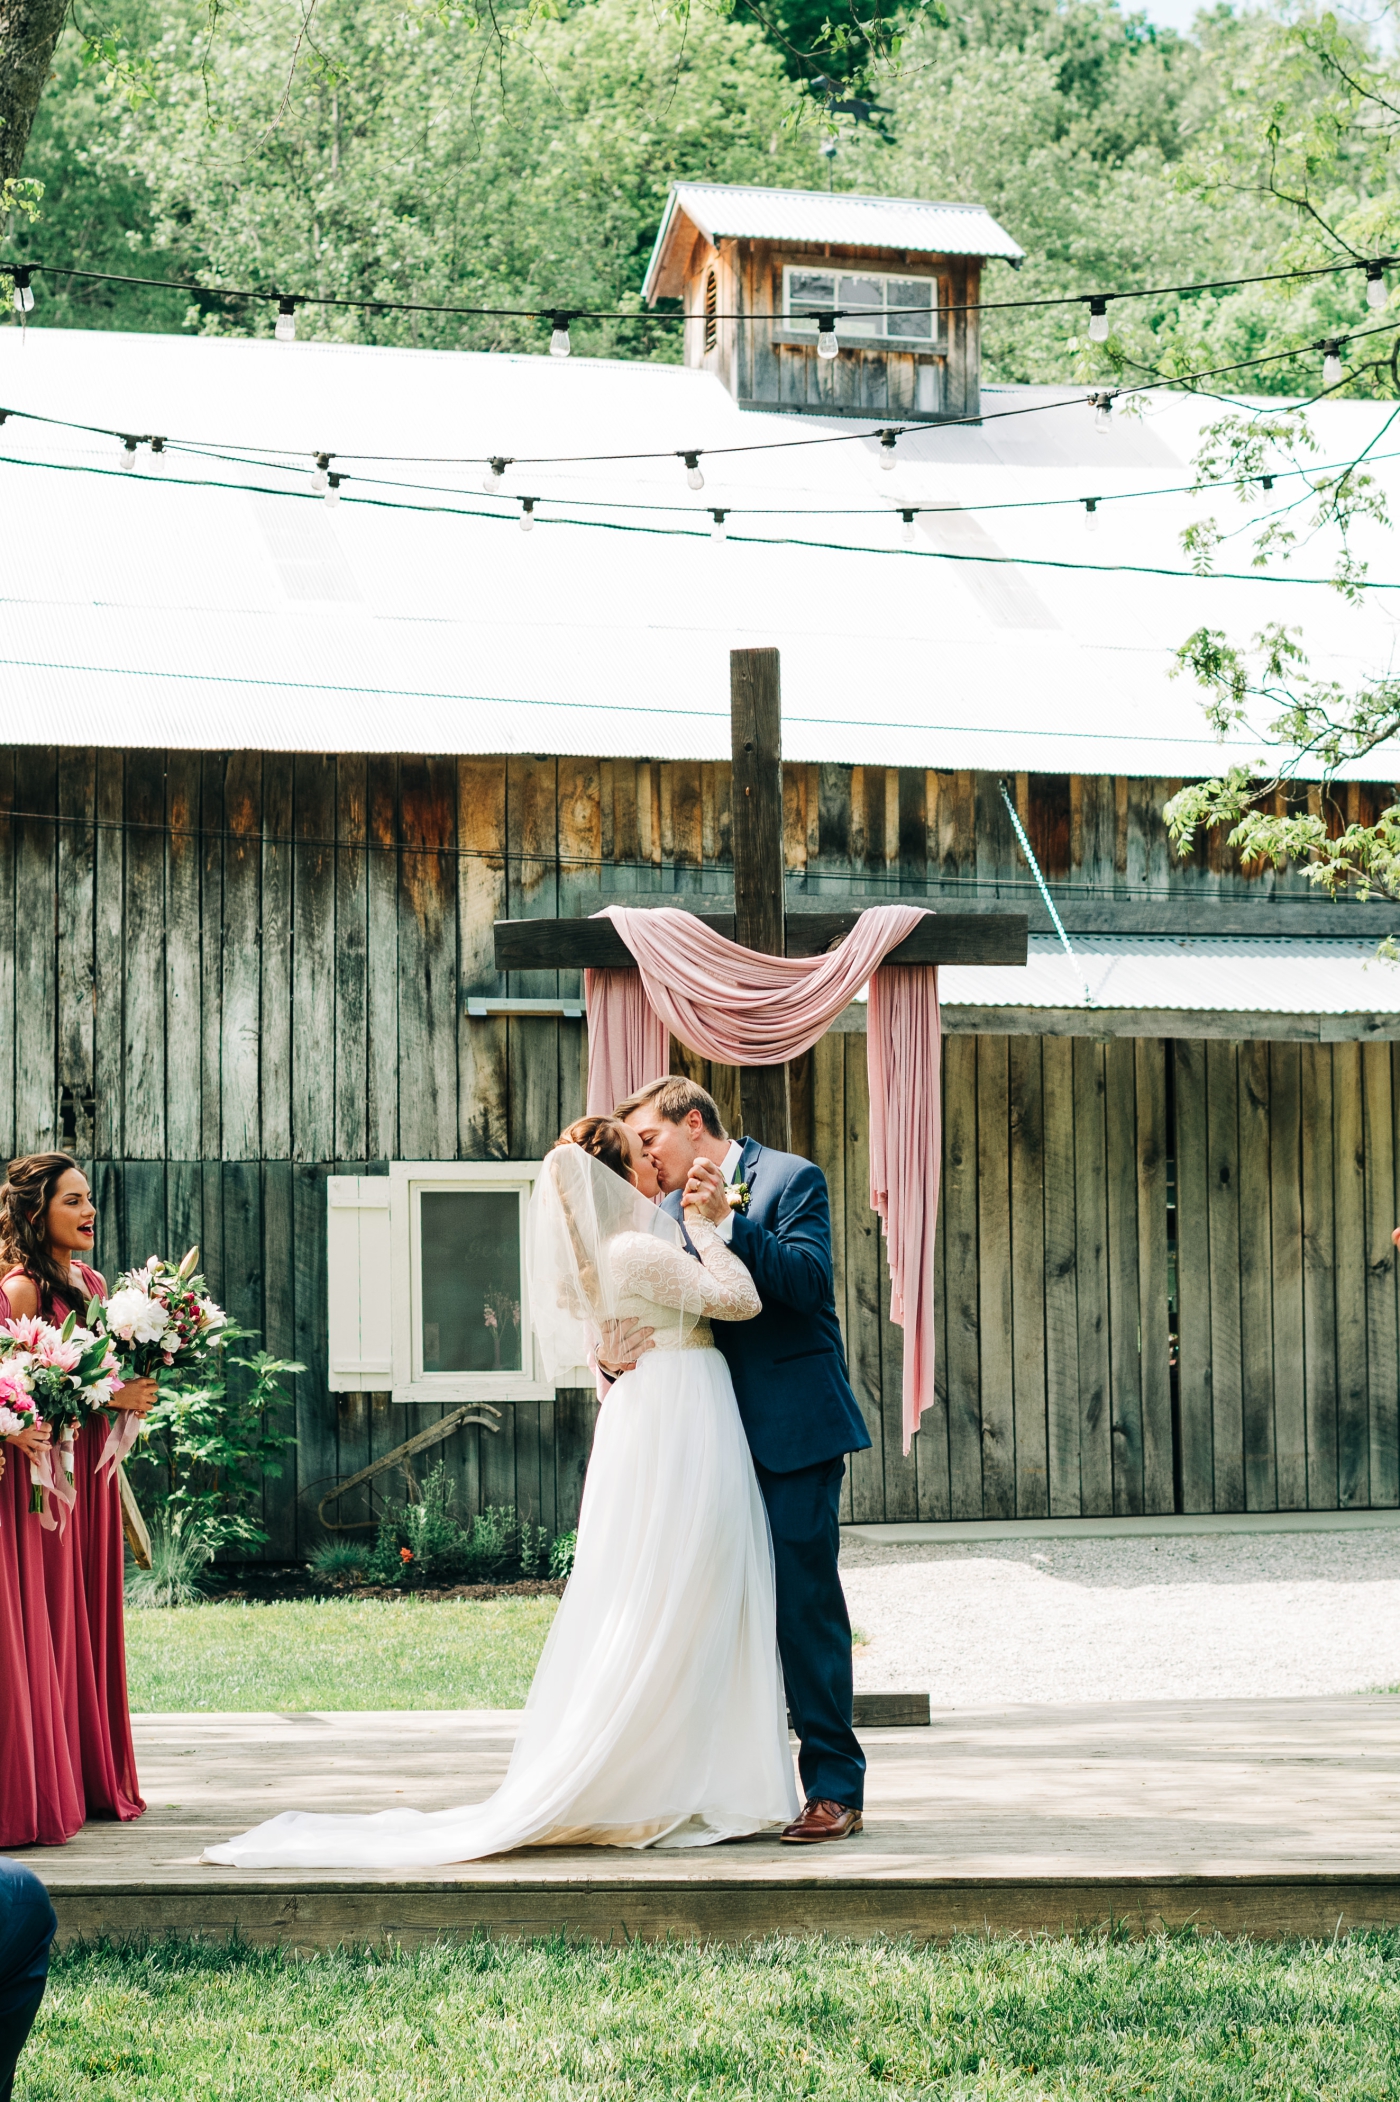 First kiss at the outdoor ceremony at The Old Barn at Brown County